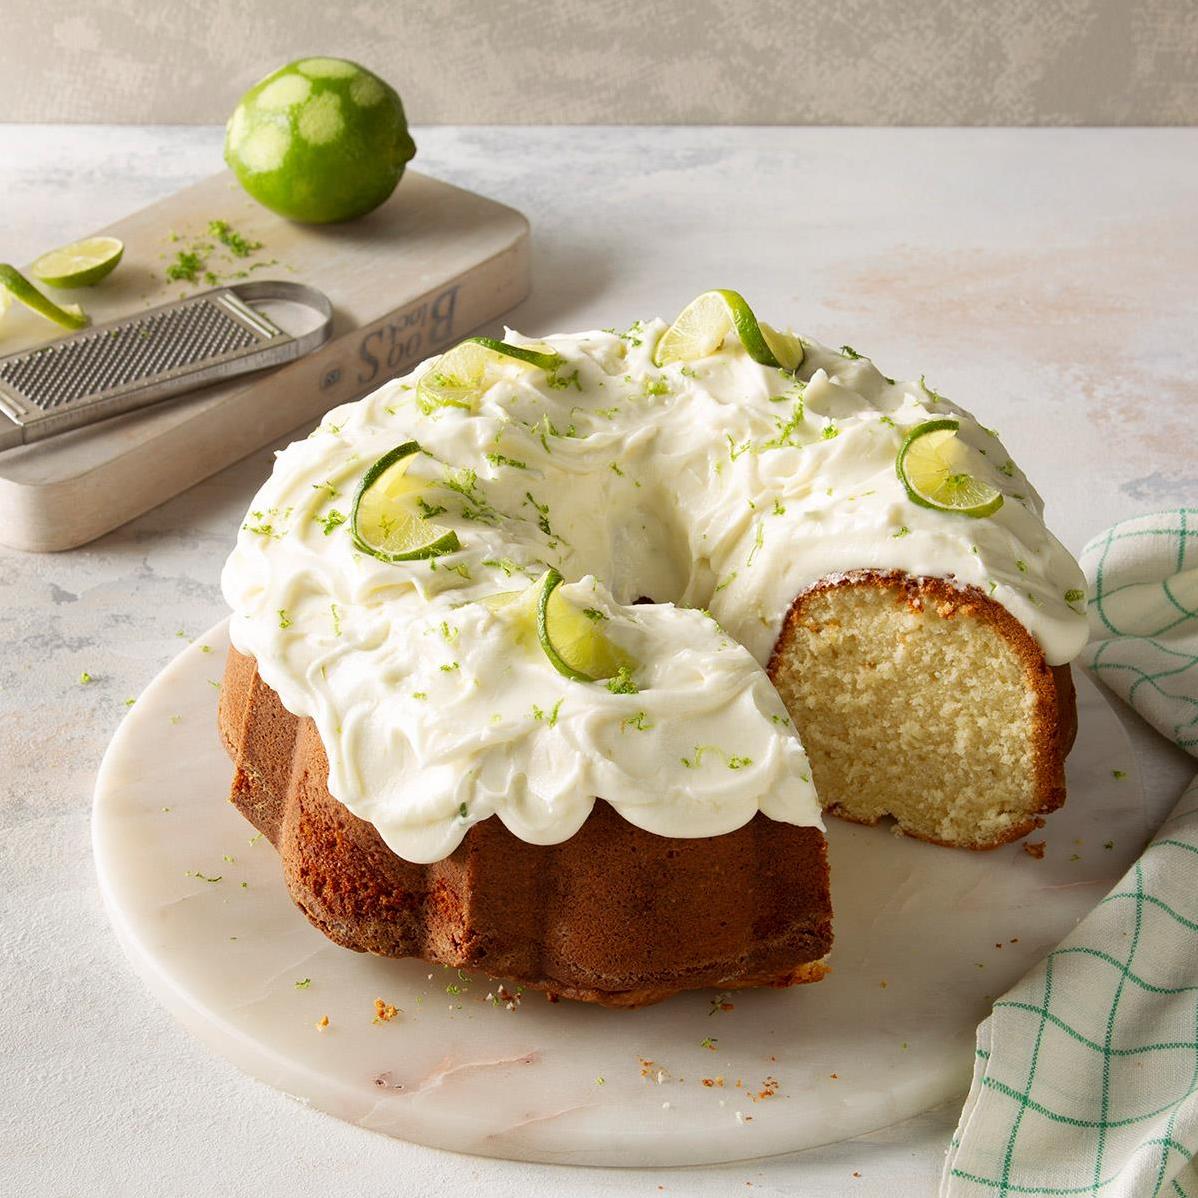  A pound cake that packs a punch of citrus flavor.